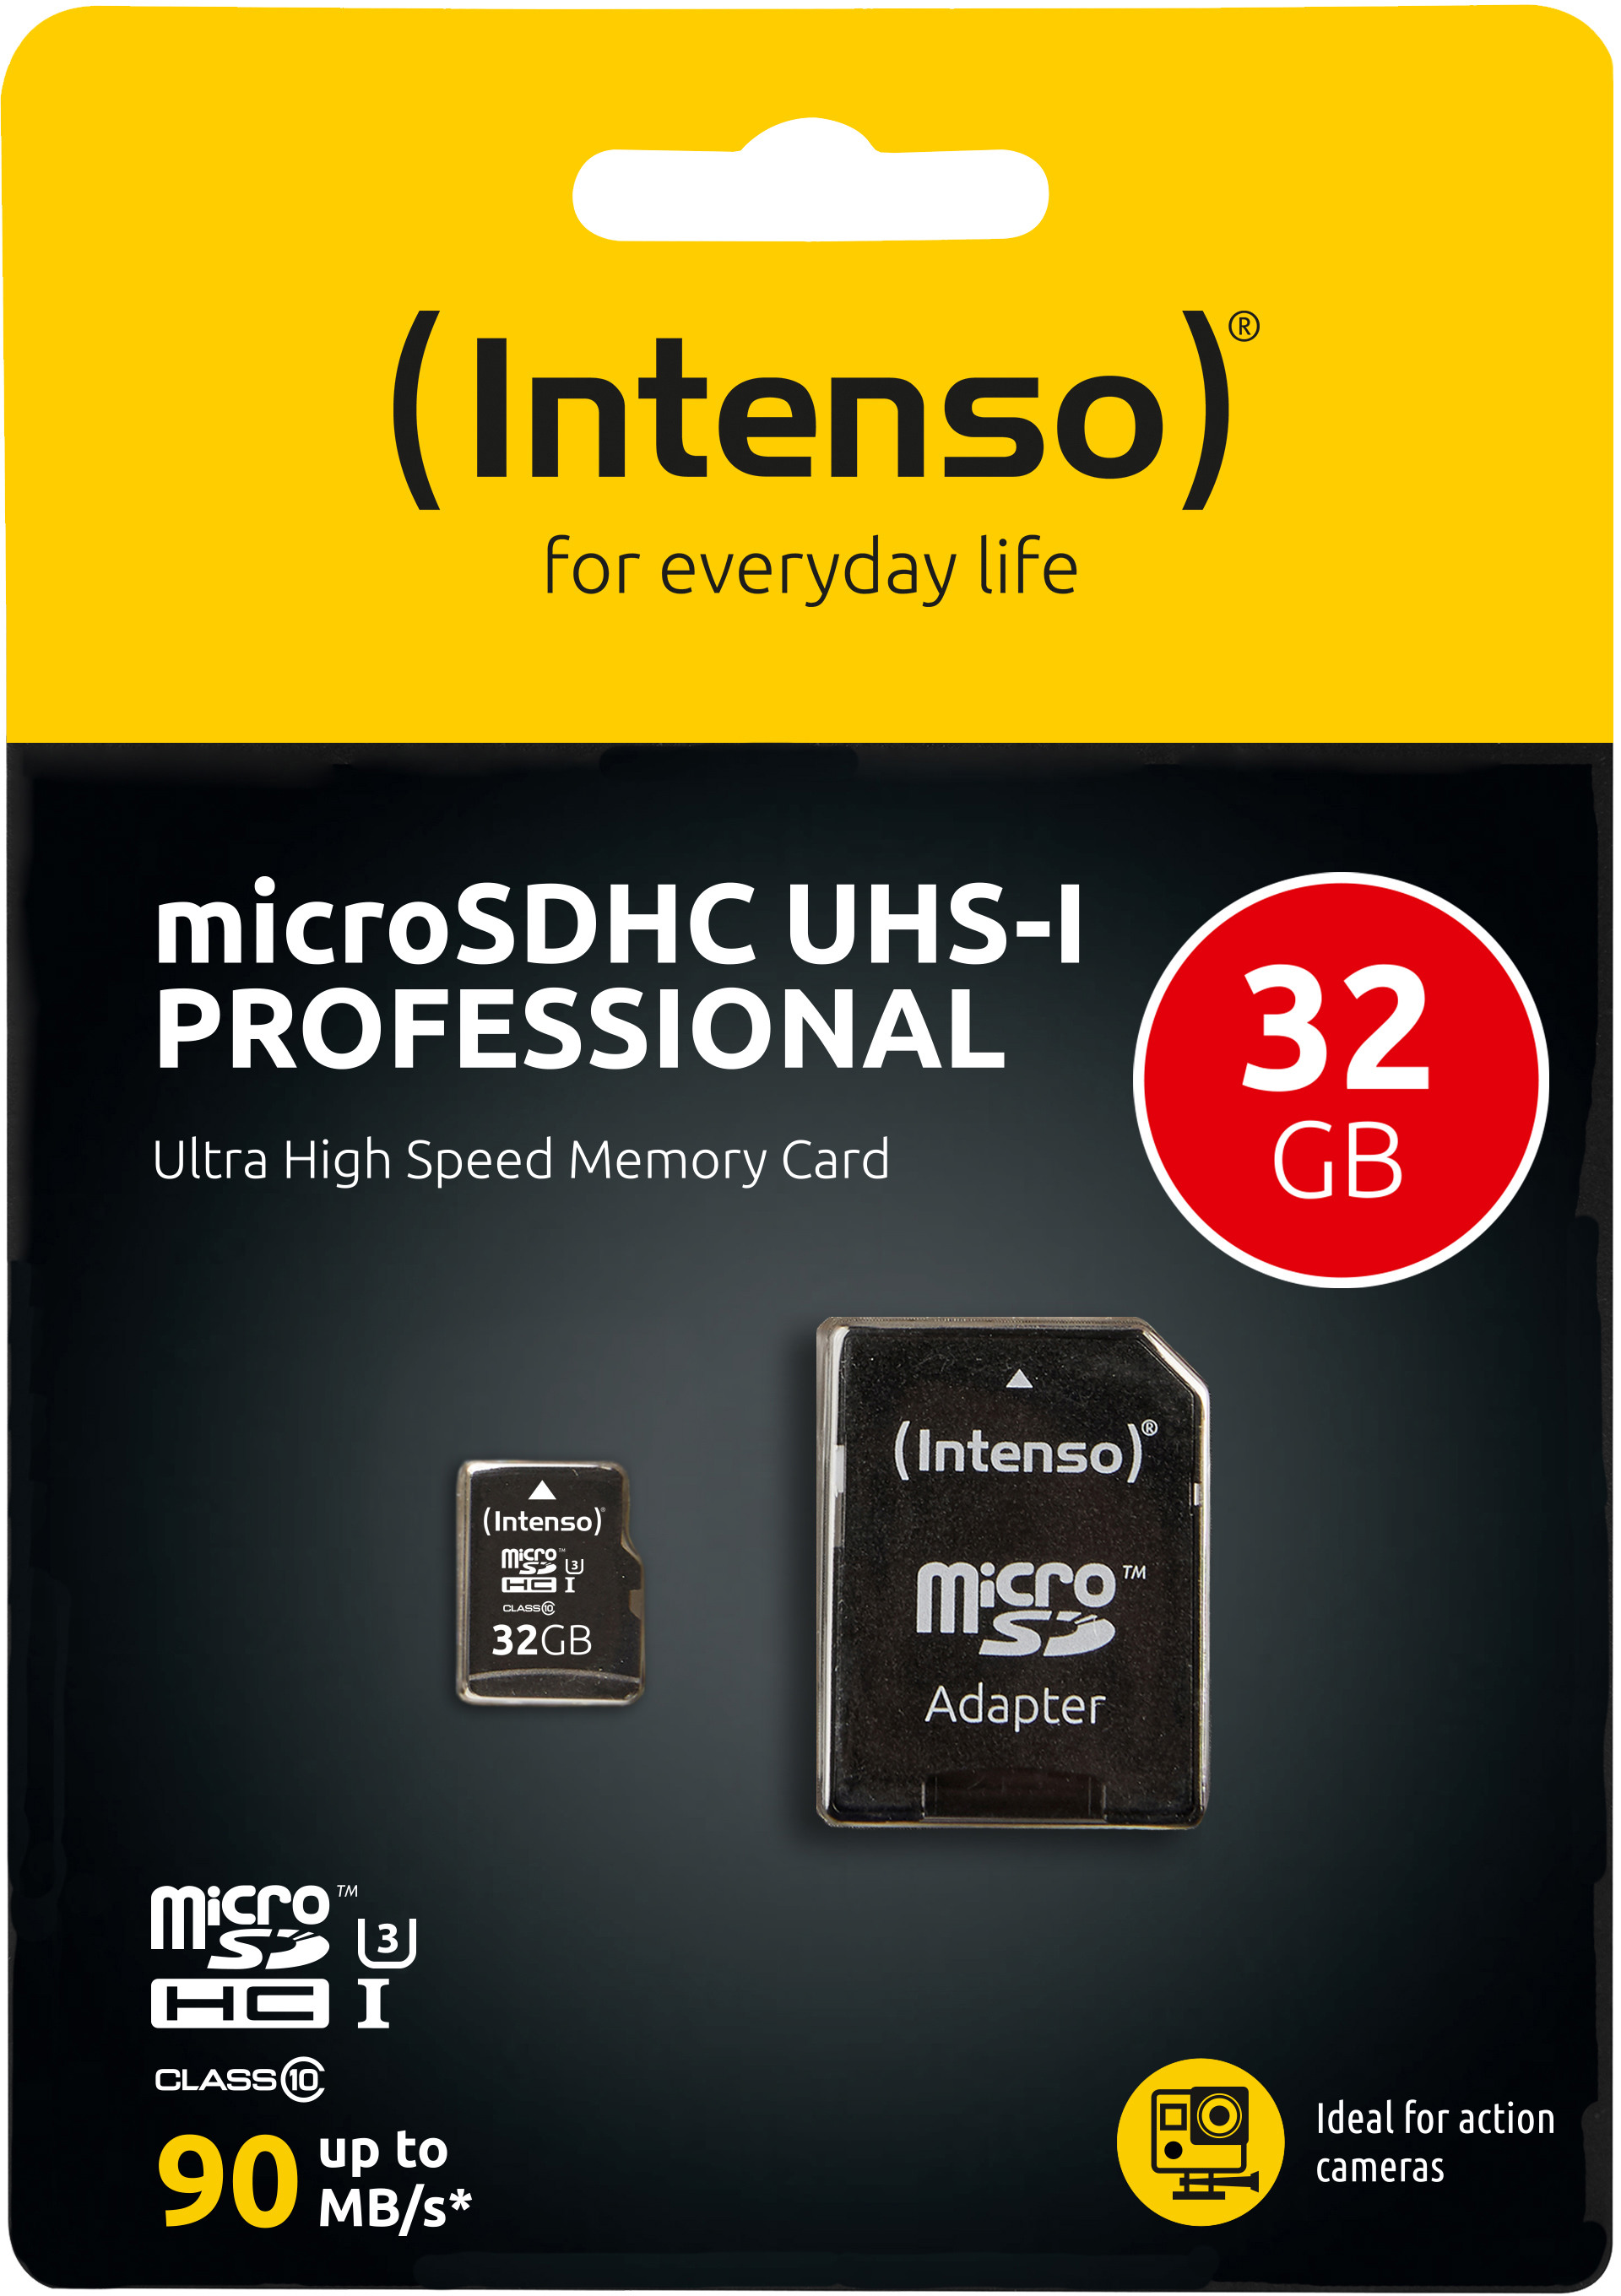 INTENSO Micro SDHC Card PRO 32GB 3433480 with adapter, UHS-I